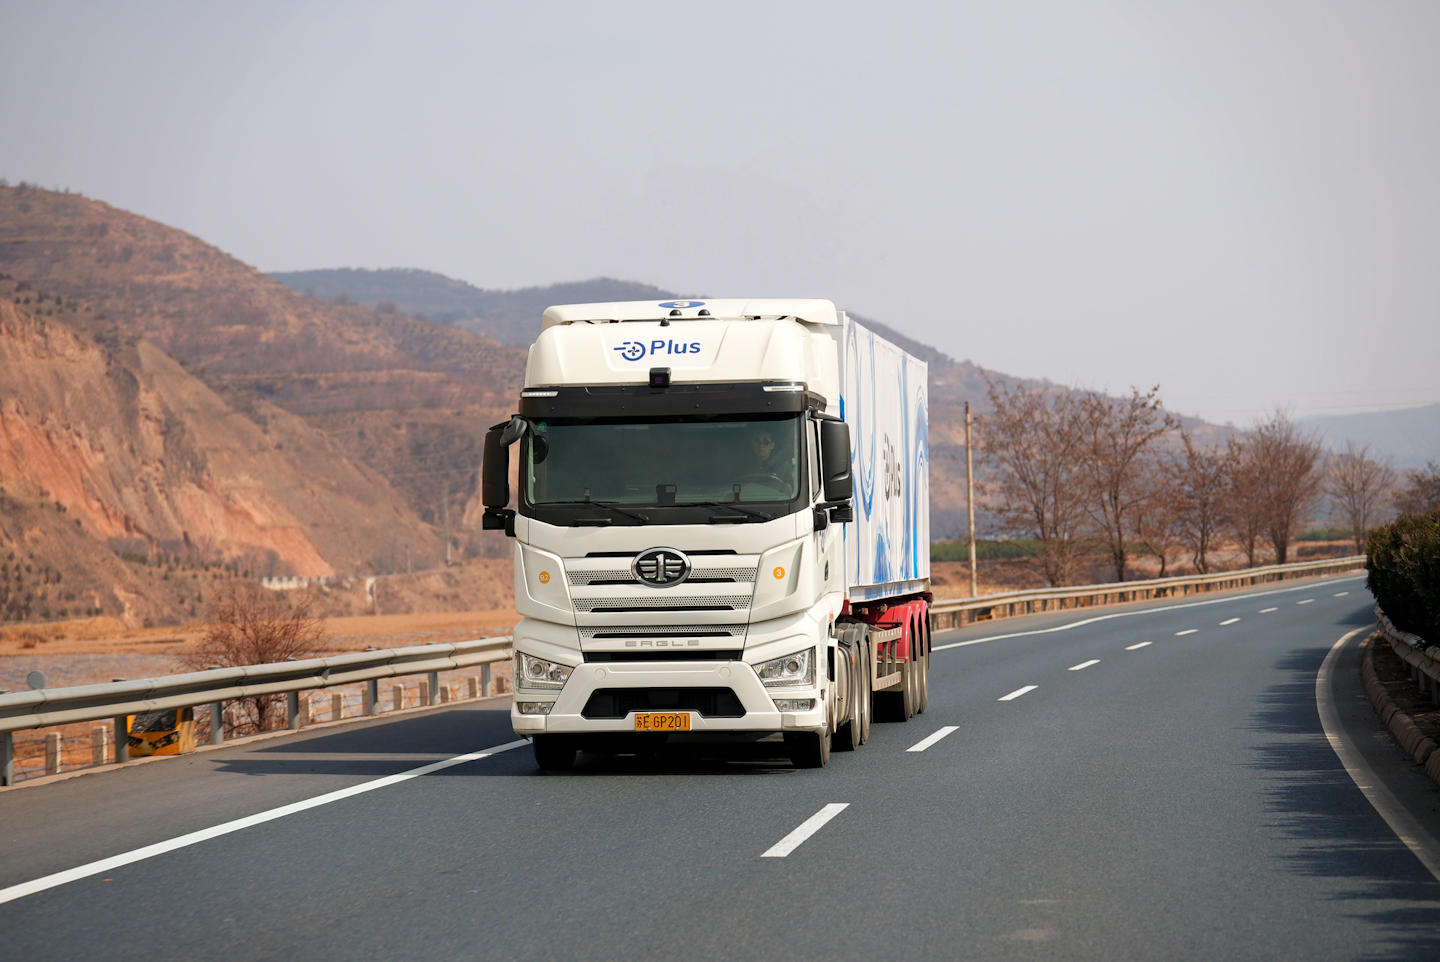 In 2018, Plus completed a pilot test of a driverless truck in China. The company's product, PlusDrive, can be installed in trucks today to improve safety and fuel efficiency.